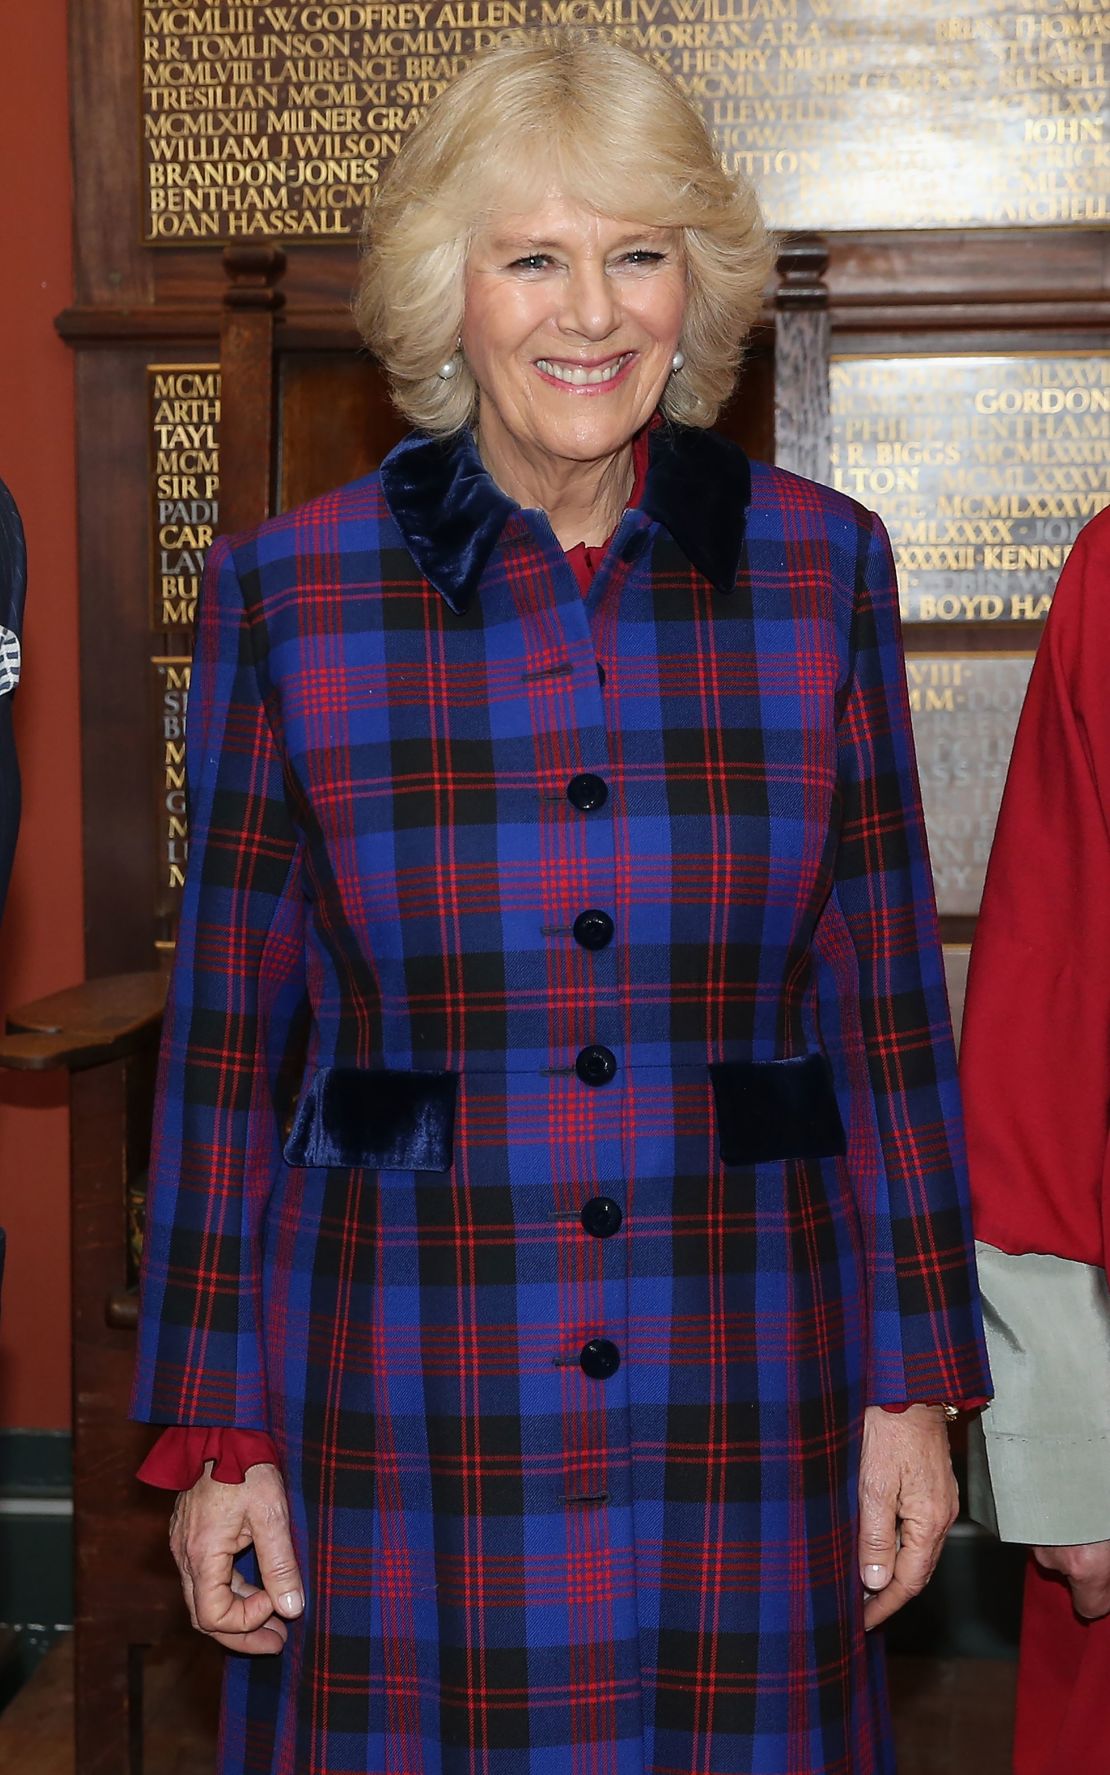 At the Art Worker's Guild in 2015 in London, Camilla opted for a chic tartan dresscoat finished with a crushed velvet collar and pockets.